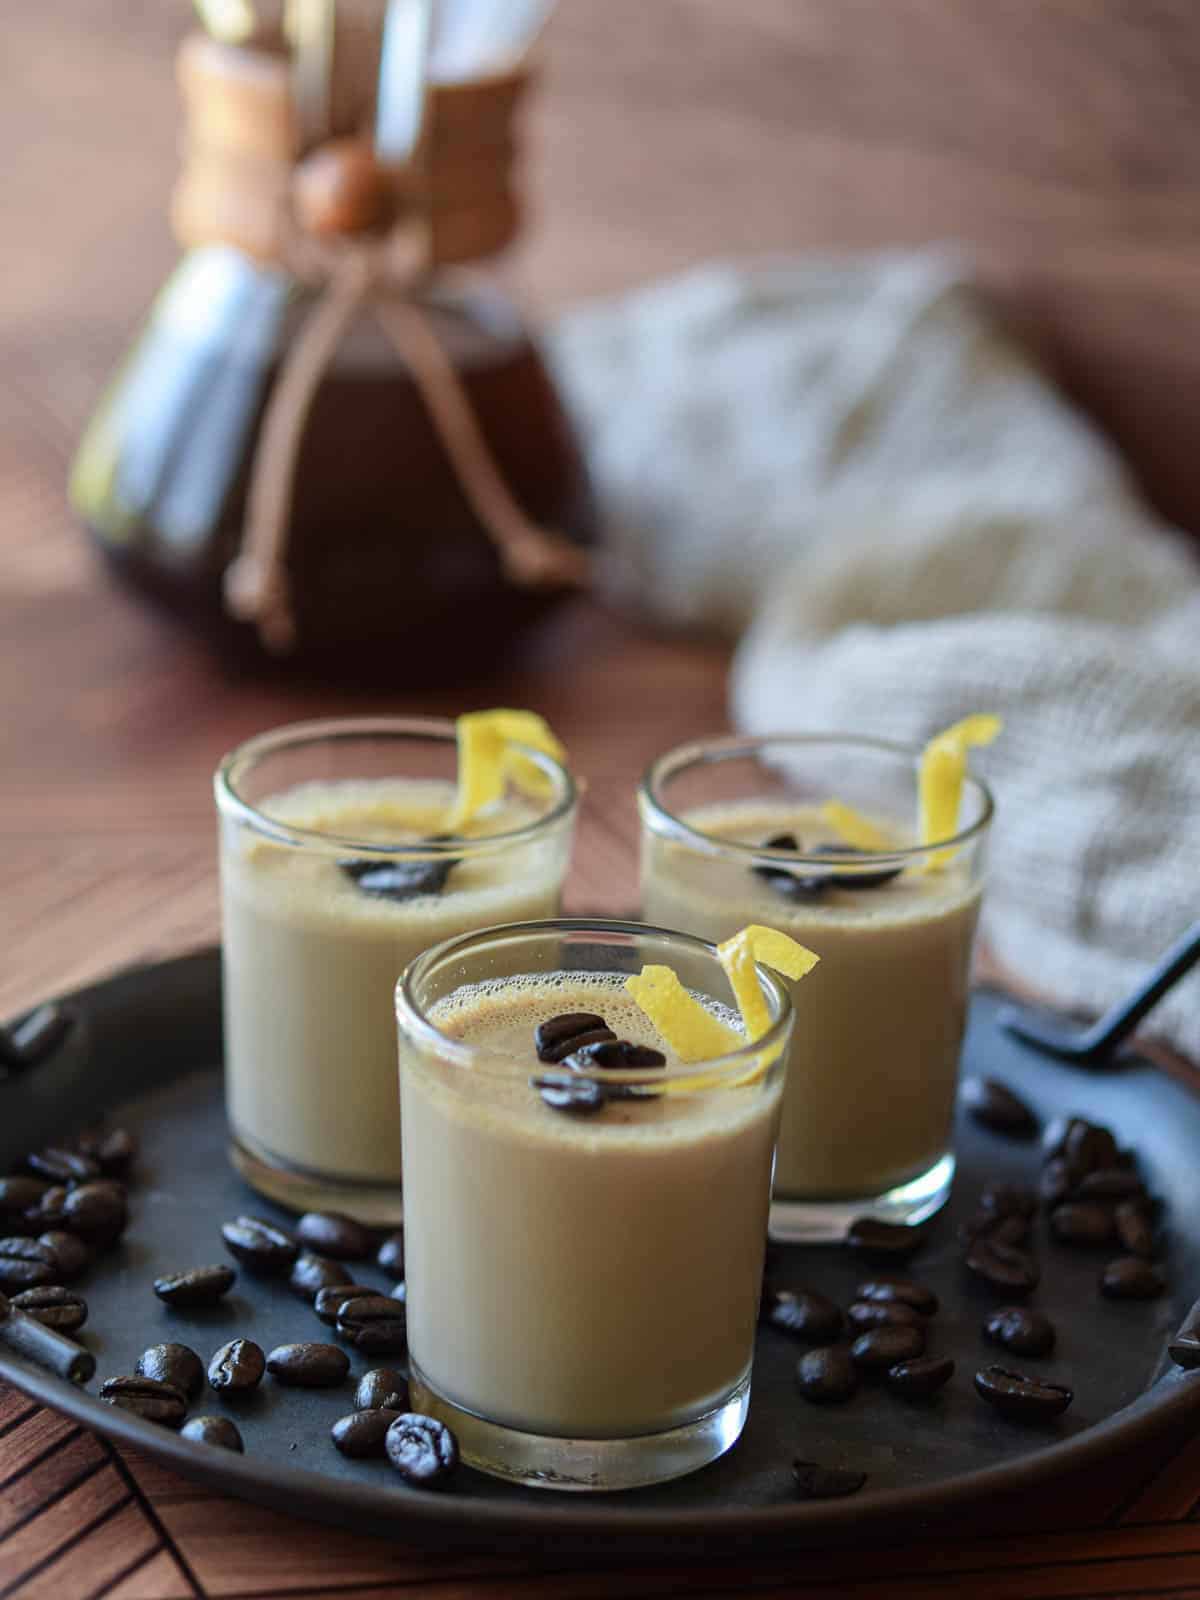 Espresso panna cotta in small glass jars with coffee beans and lemon rind twists.